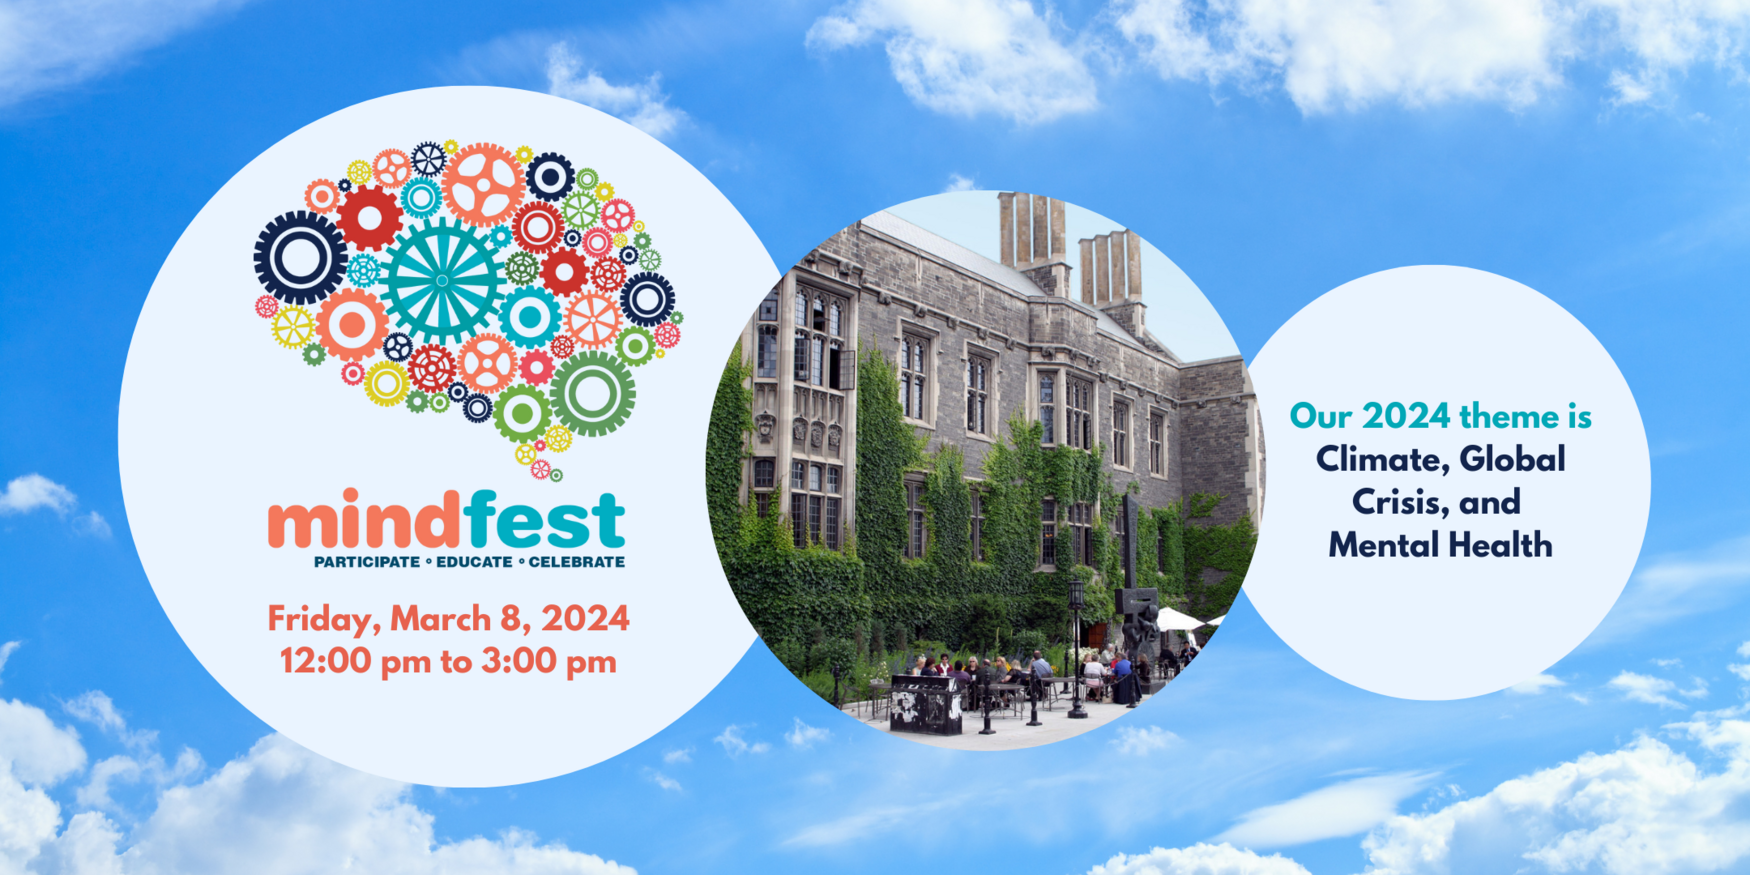 The Mindfest logo, a colorful collection of gears in the shape of a brain, alongside a photo of Hart House on the U of T campus.